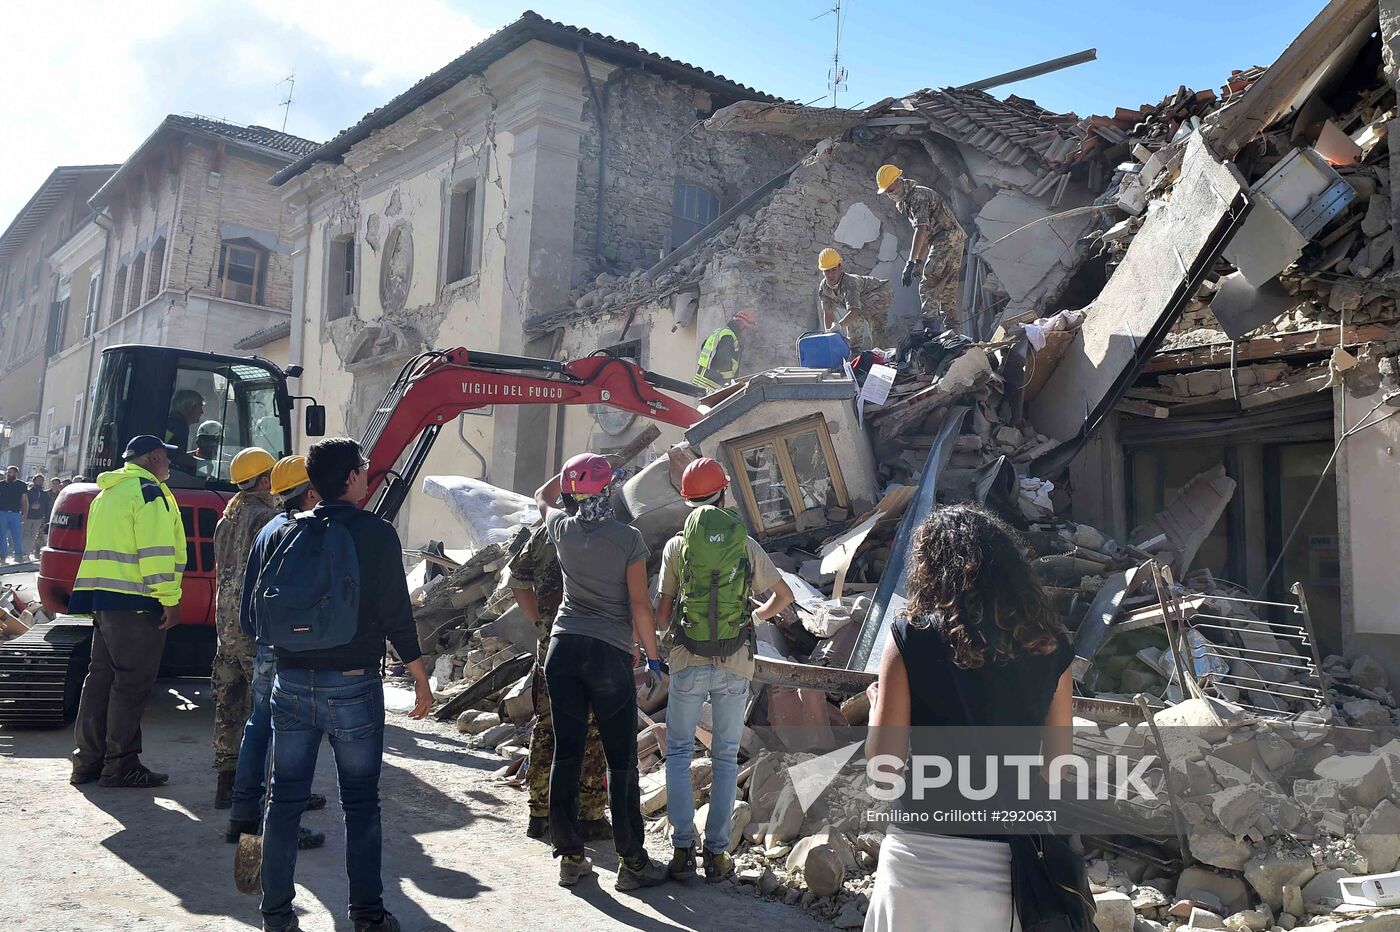 Earthquake consequences in Italy